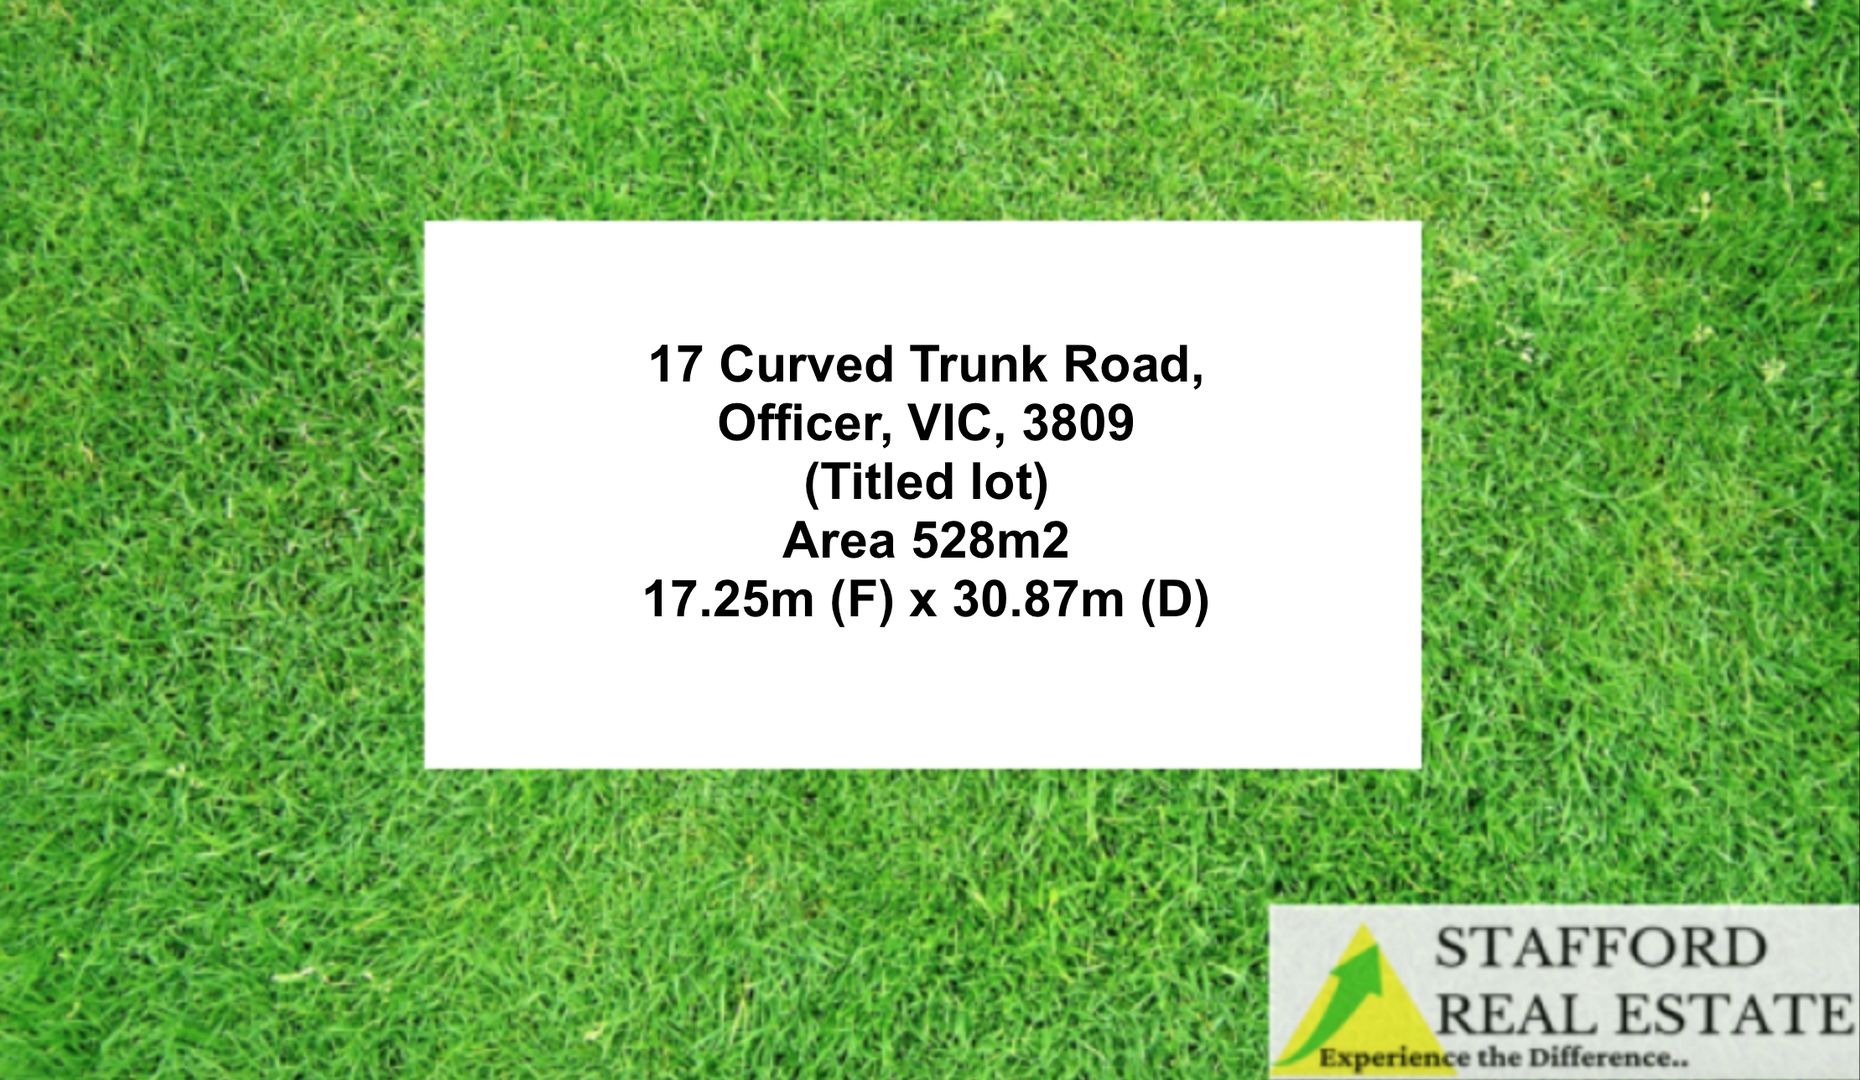 17 Curved Trunk Road, Officer VIC 3809